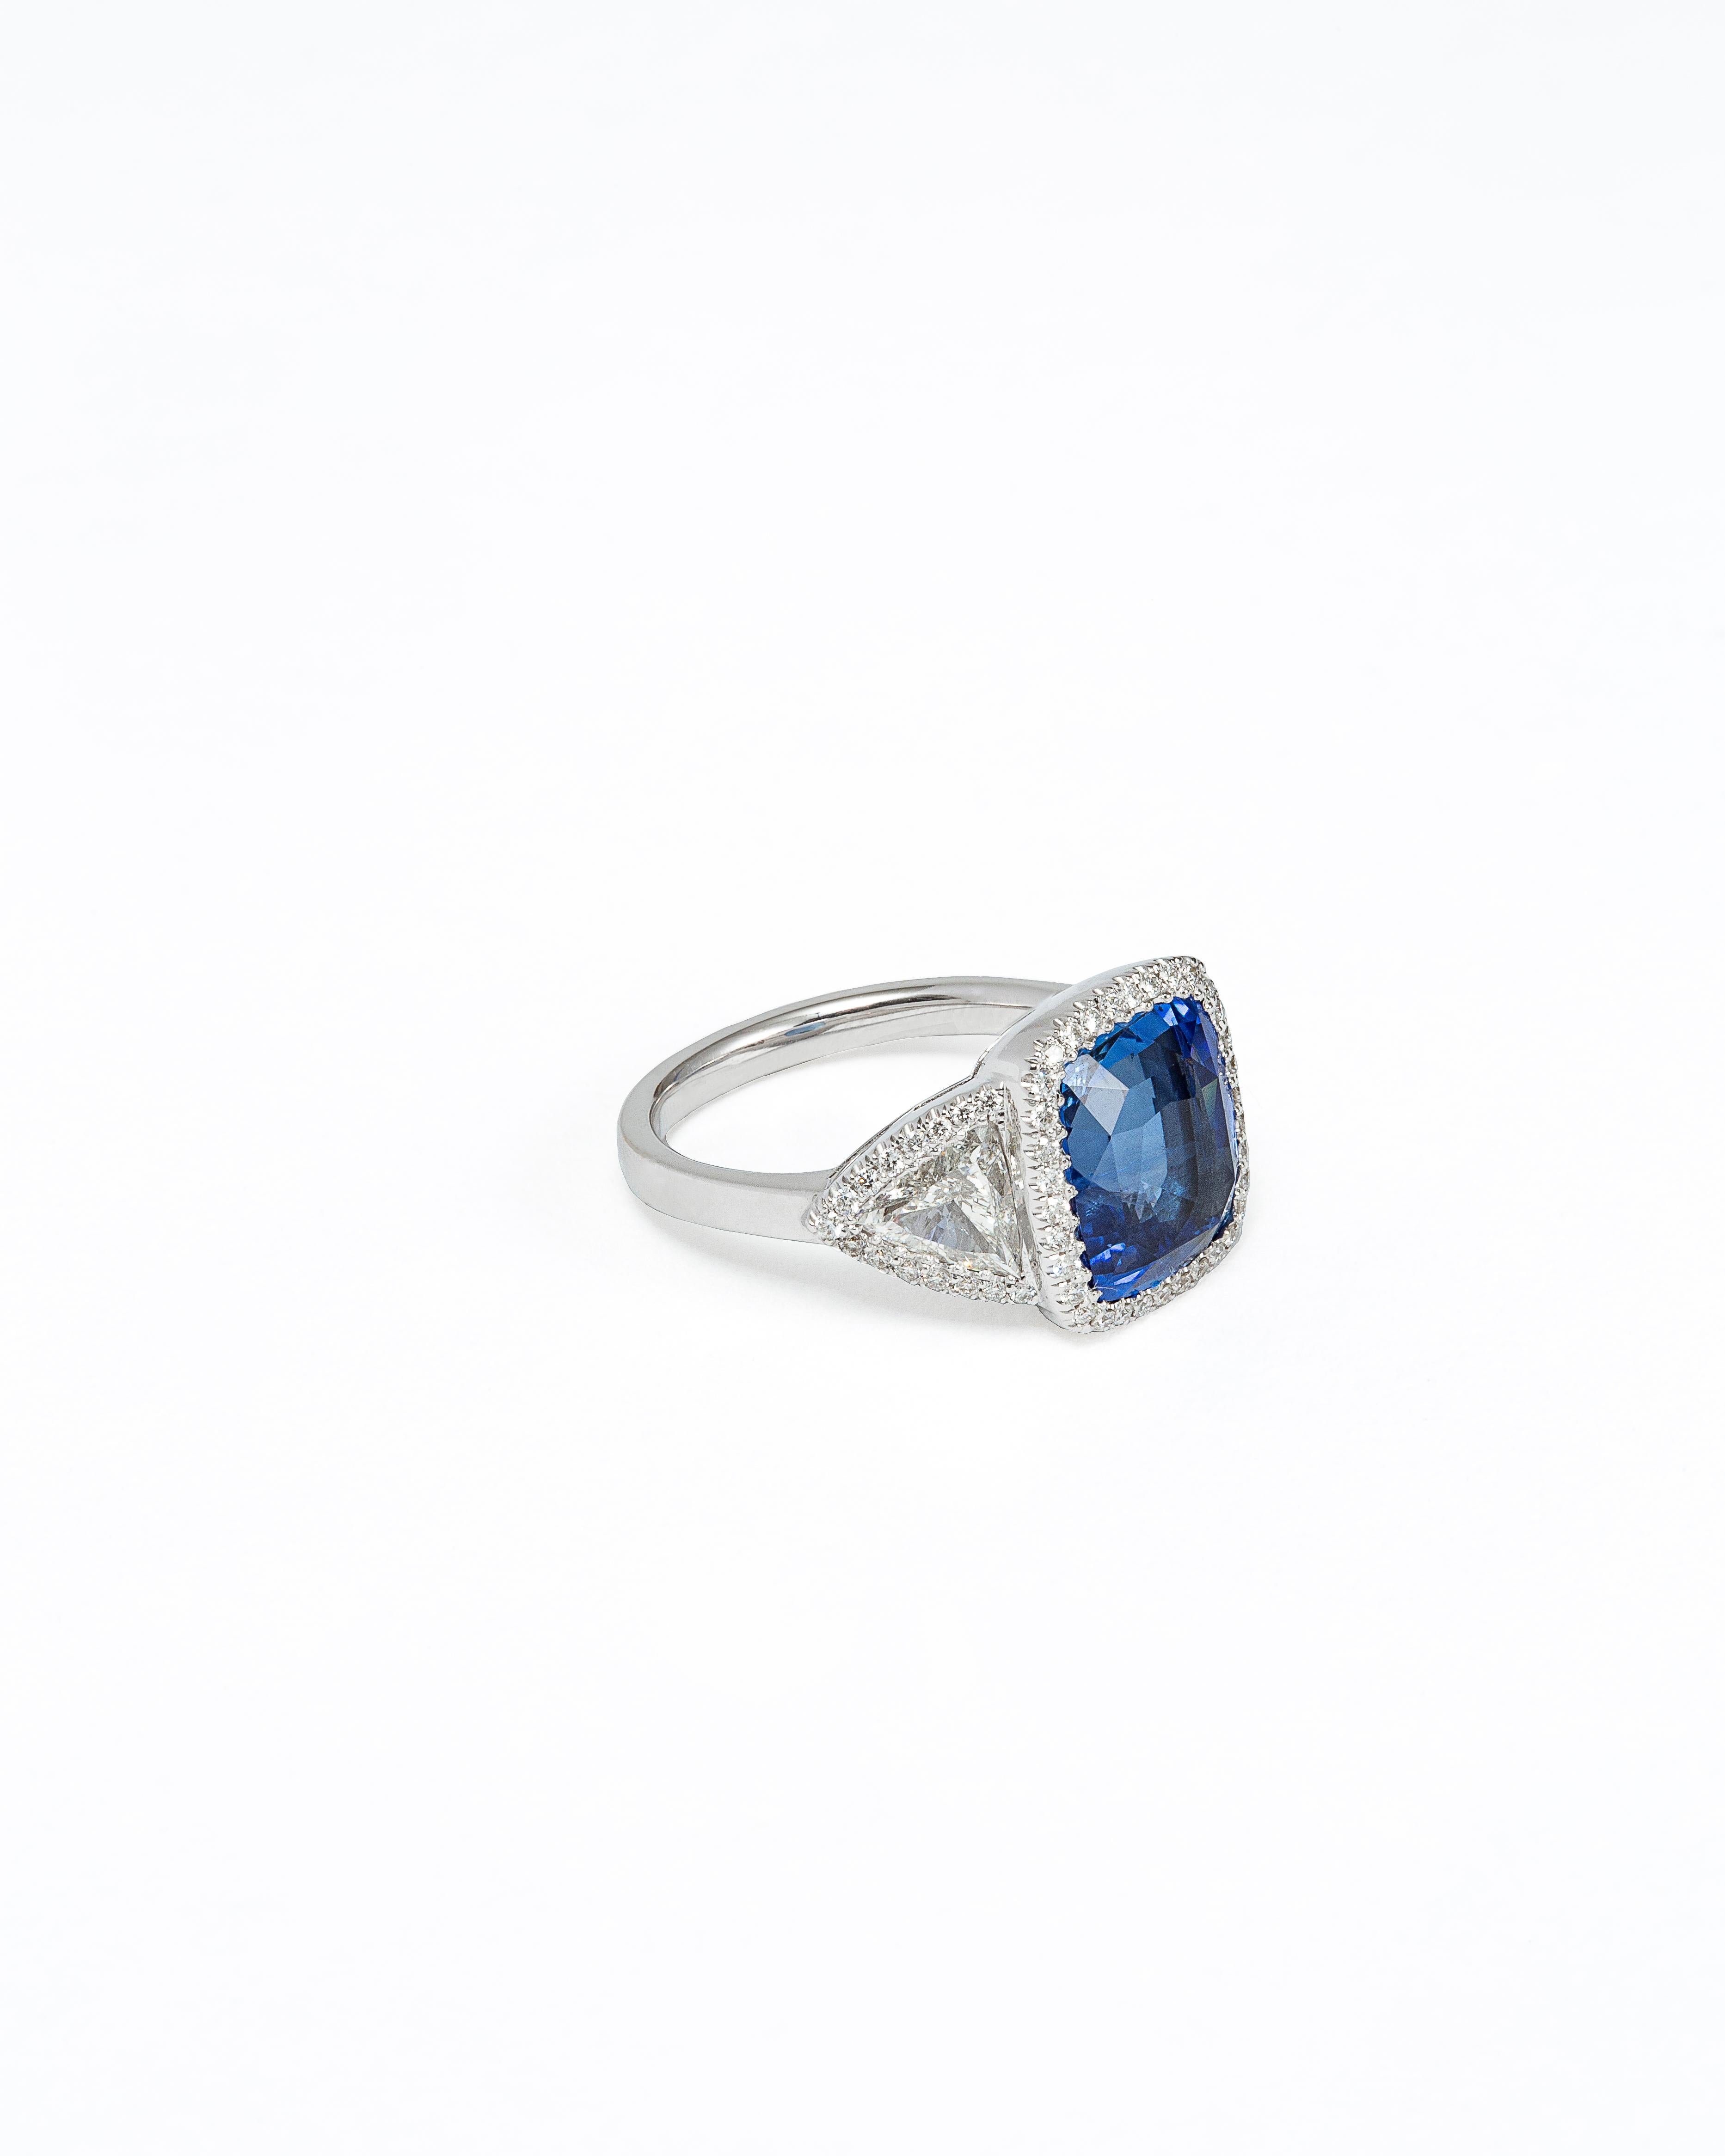 Ring made by our craftsmen in Antwerp. The ring is made of gold 18K, set with a central Ceylon deep blue sapphire of 6.50 Carats. We brought ourselves the sapphire from Sri Lanka and mounted it here in Belgium. The ring is also set with two triangle